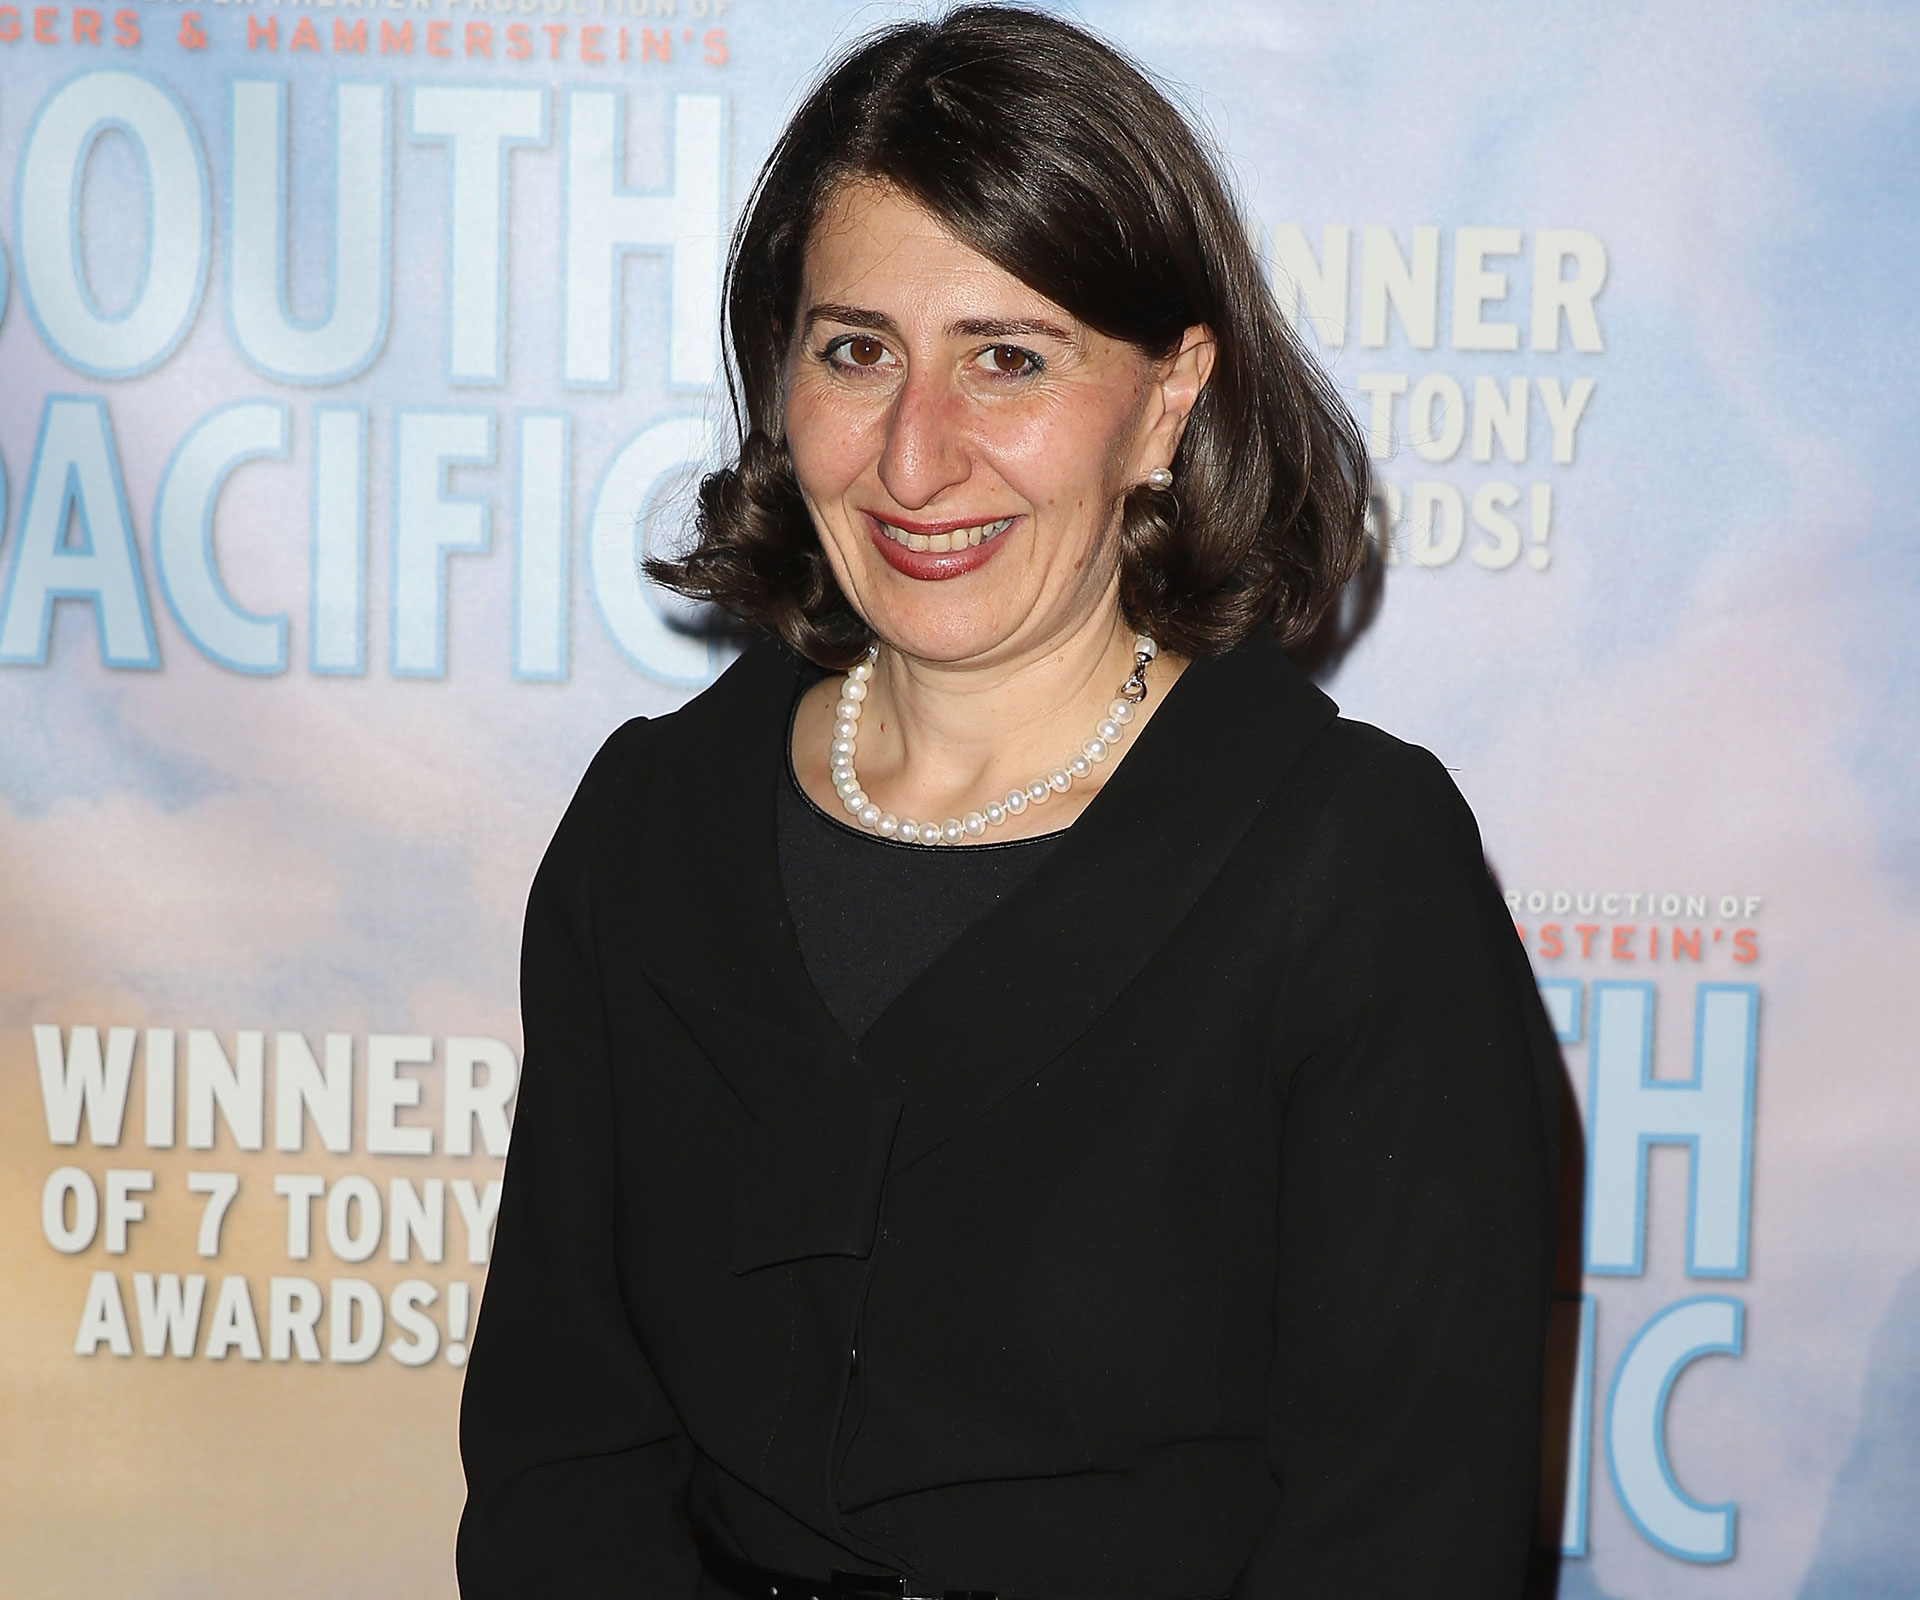 Gladys Berejiklian has already been asked why she doesn’t have children in press conference 